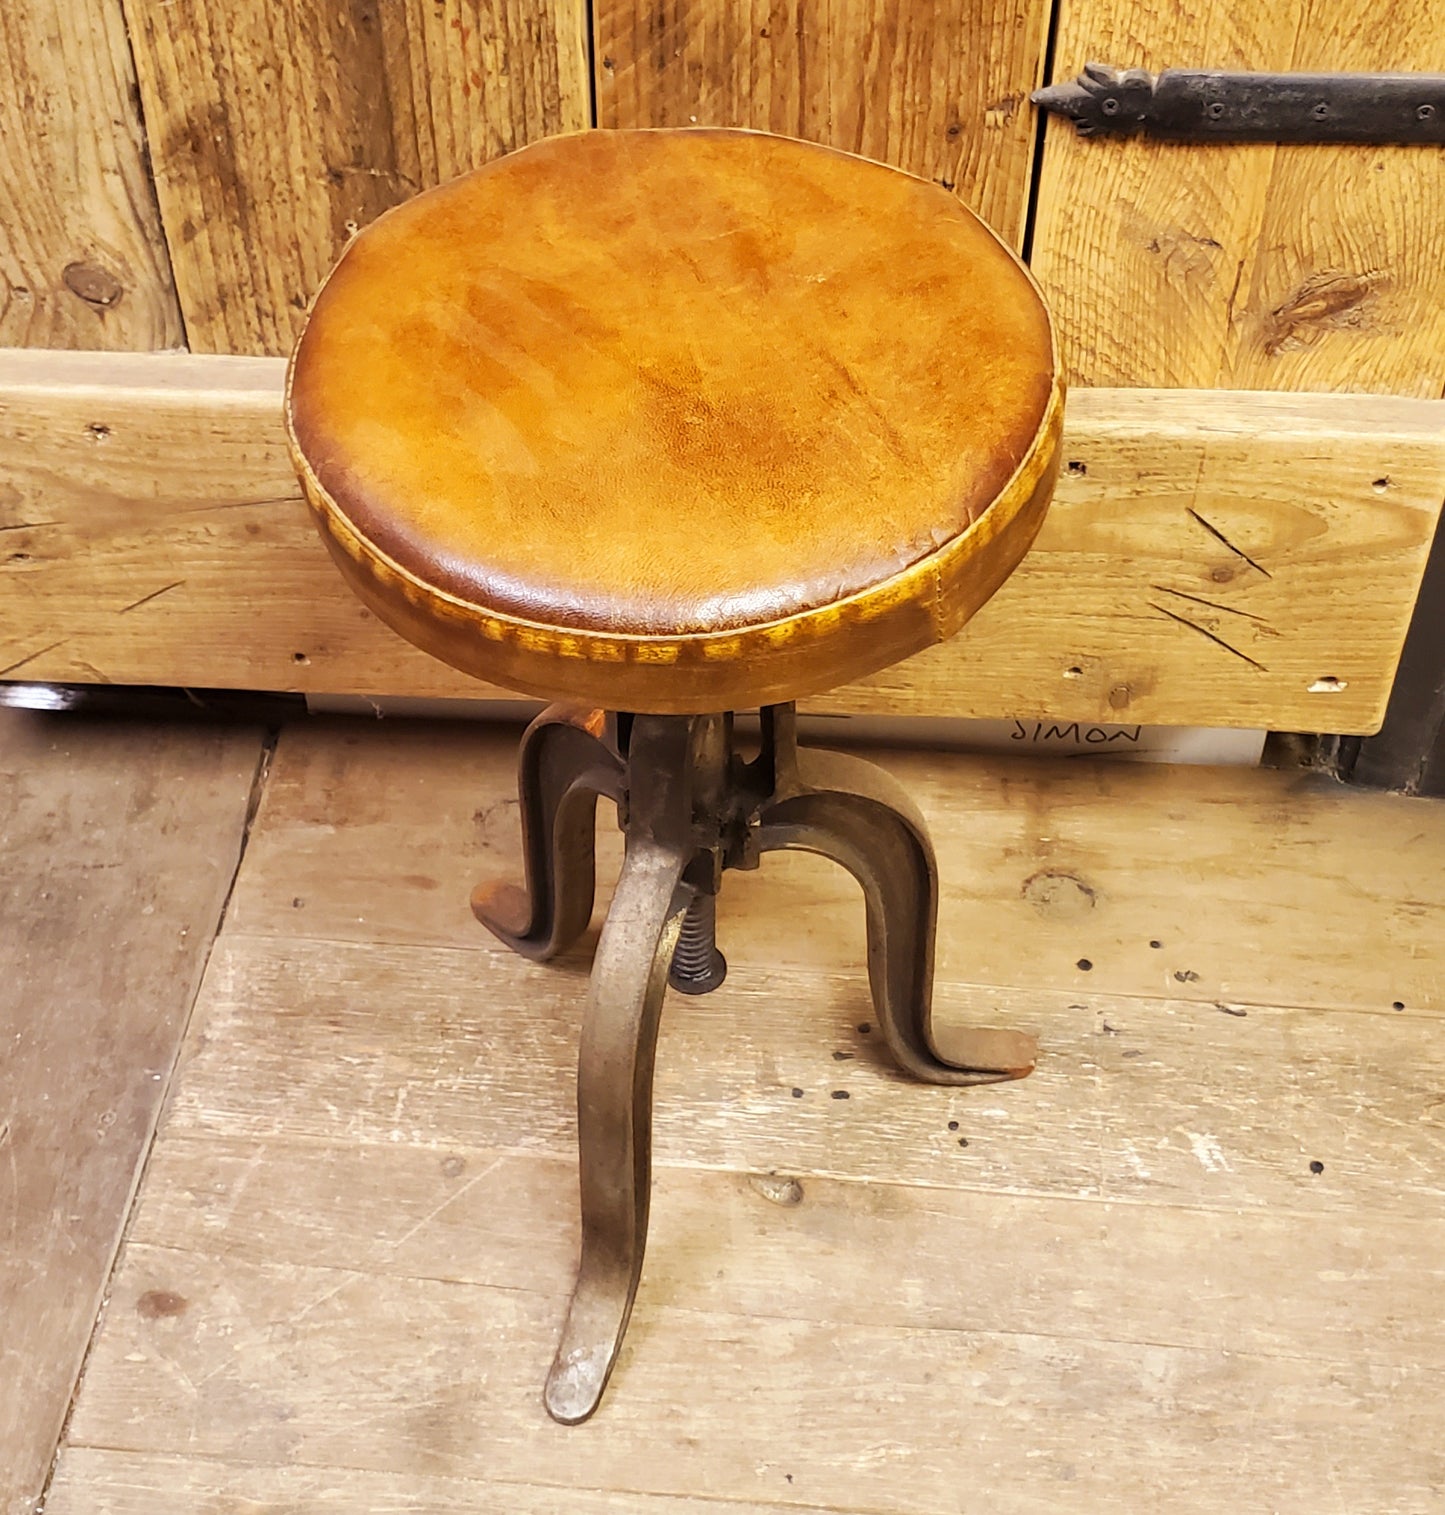 The Jameson - Vintage Swivel Stool With Leather Top